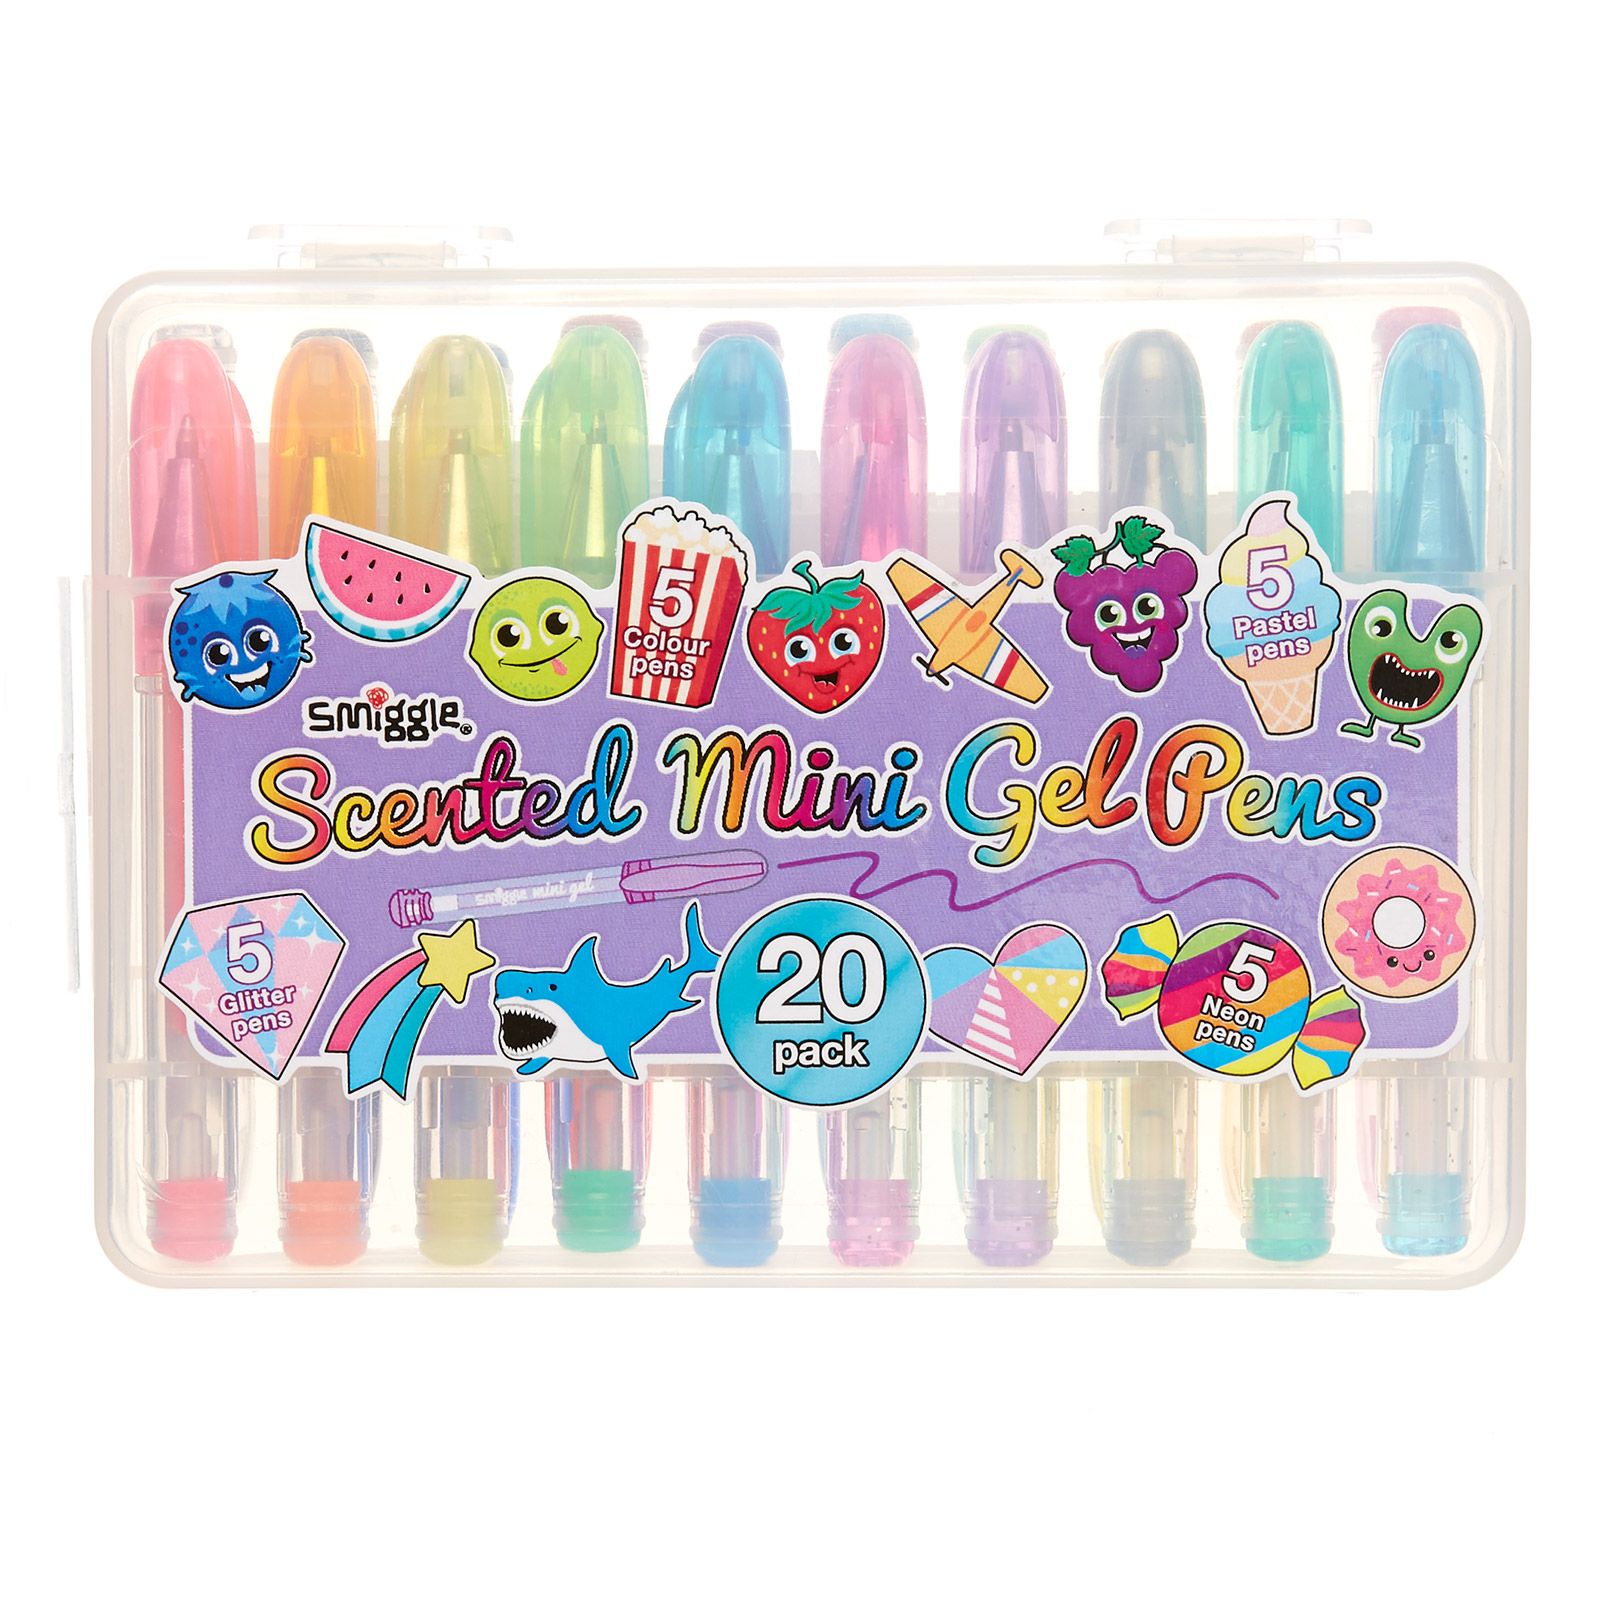 Getthis4ME - Scented Mini Gel Pens X20. Which Smiggle pen